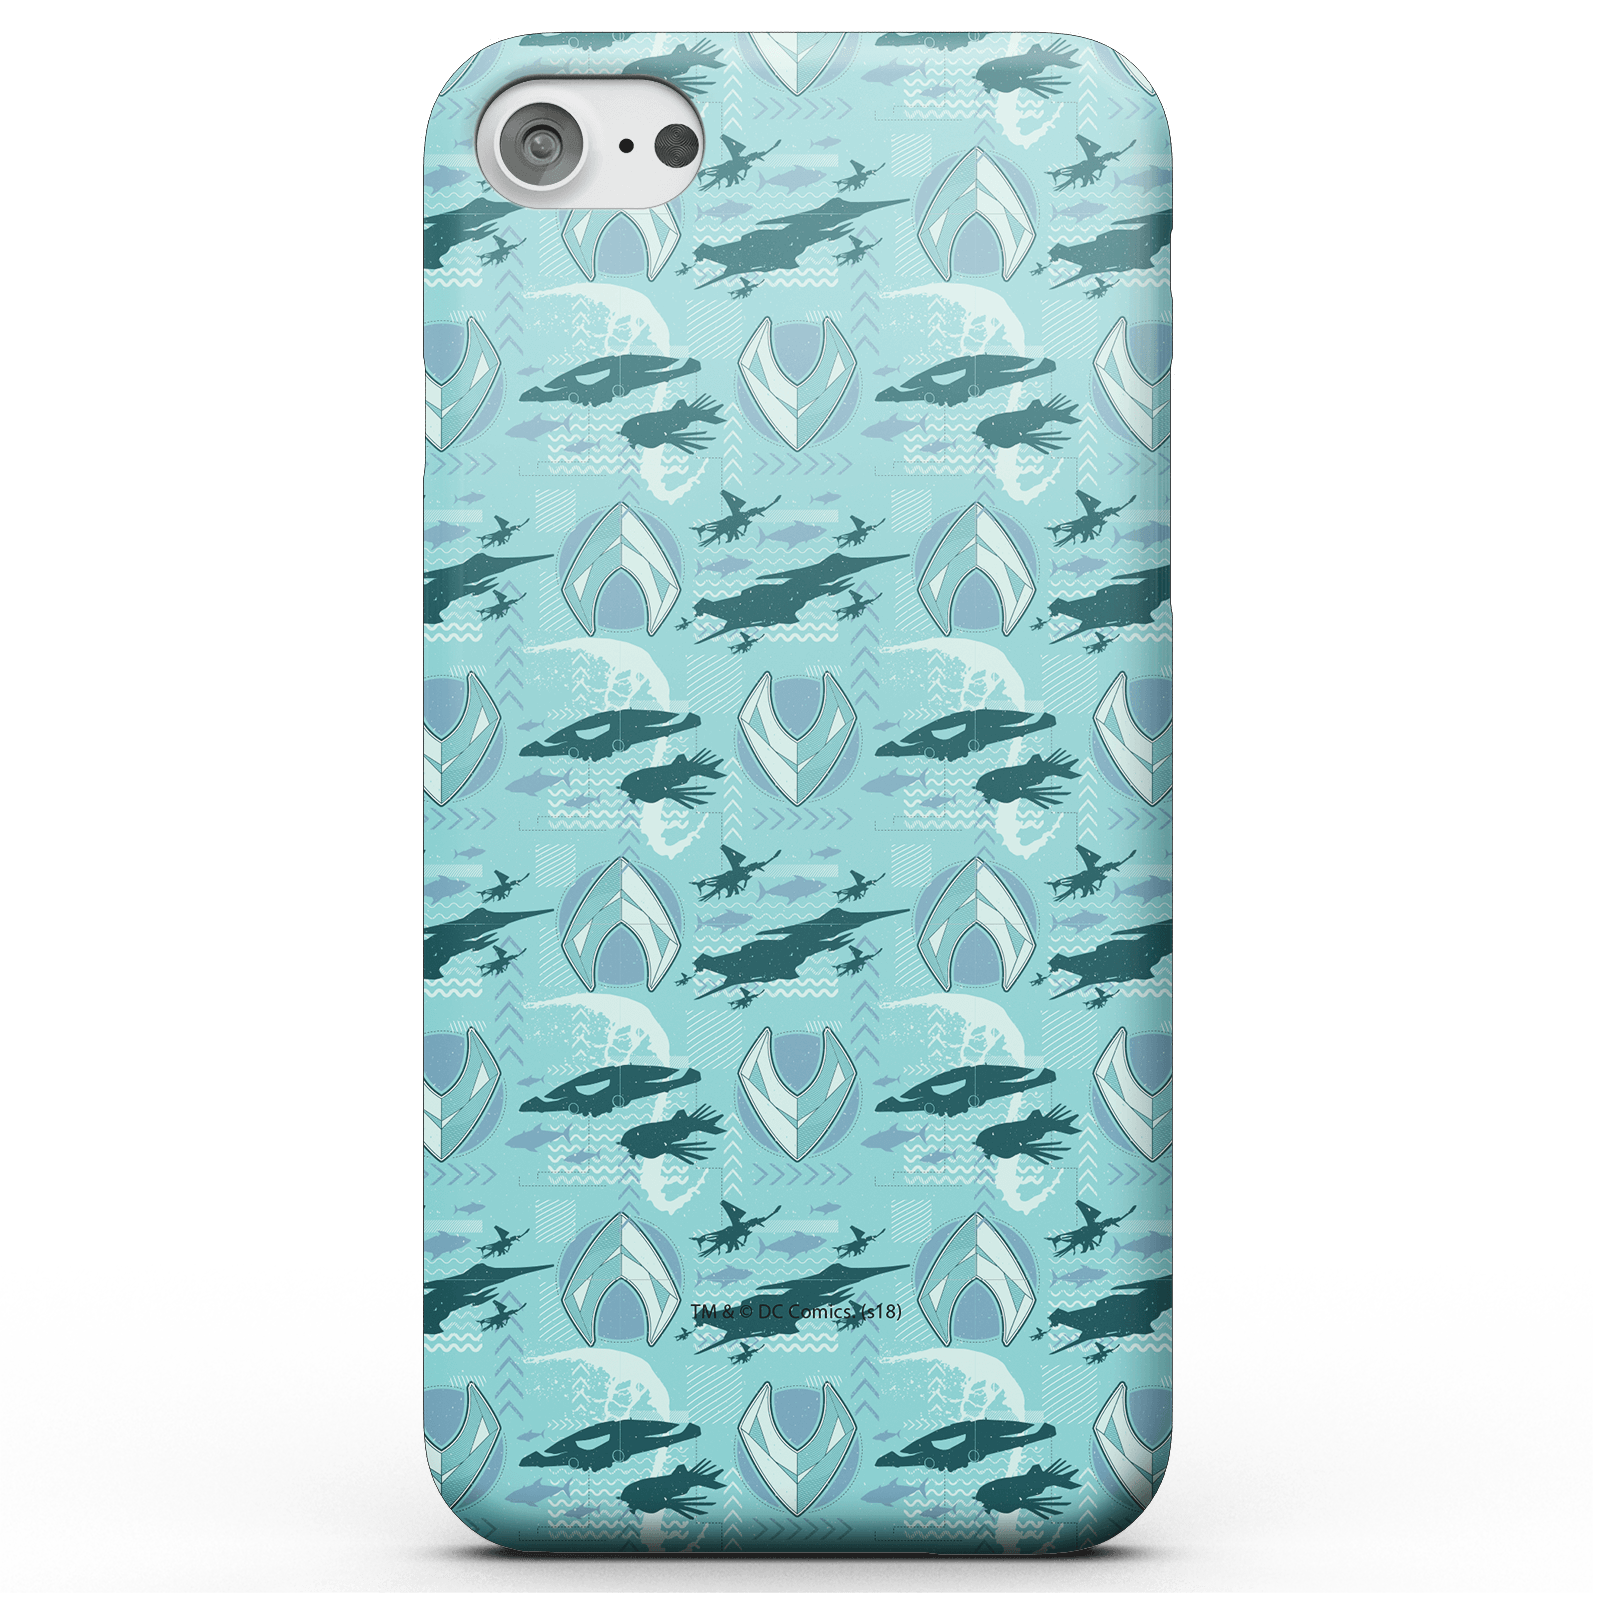 Aquaman Ships Phone Case for iPhone and Android - Samsung S8 - Snap Case - Gloss